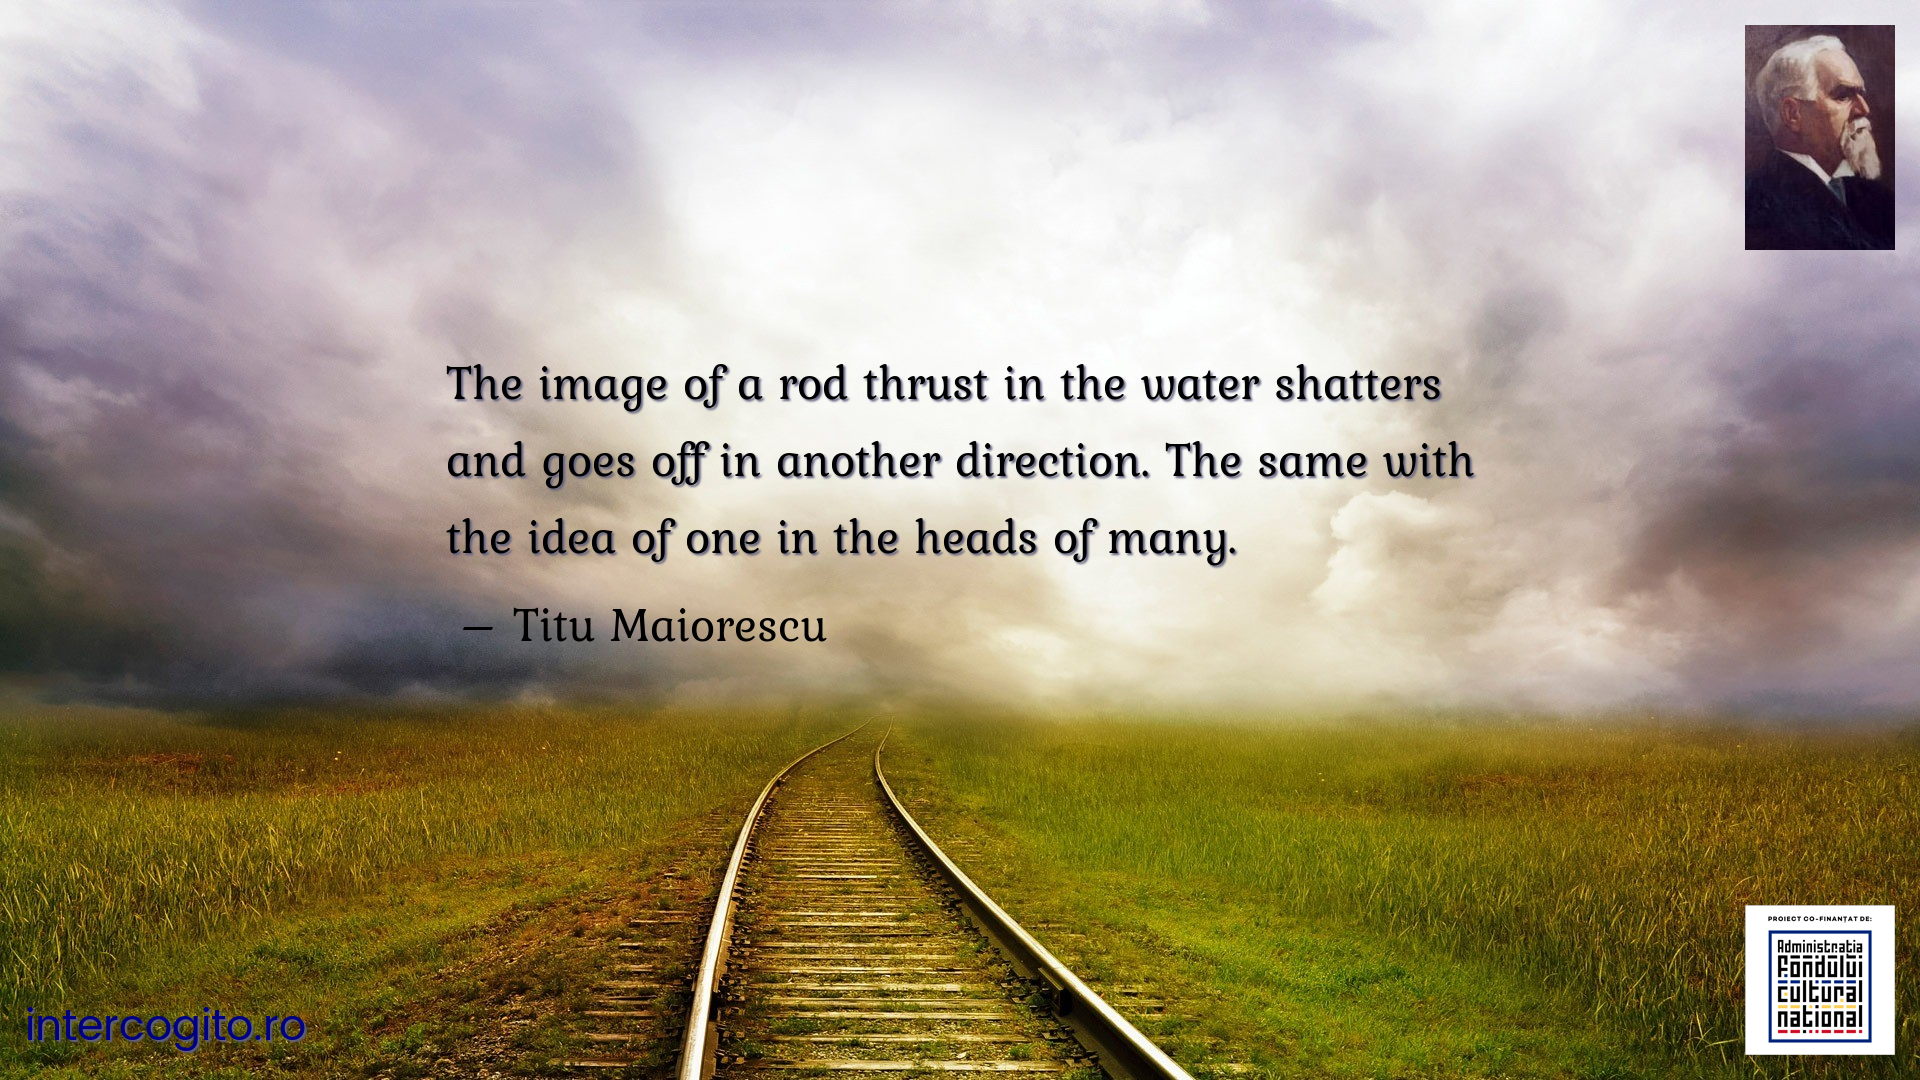 The image of a rod thrust in the water shatters and goes off in another direction. The same with the idea of one in the heads of many.